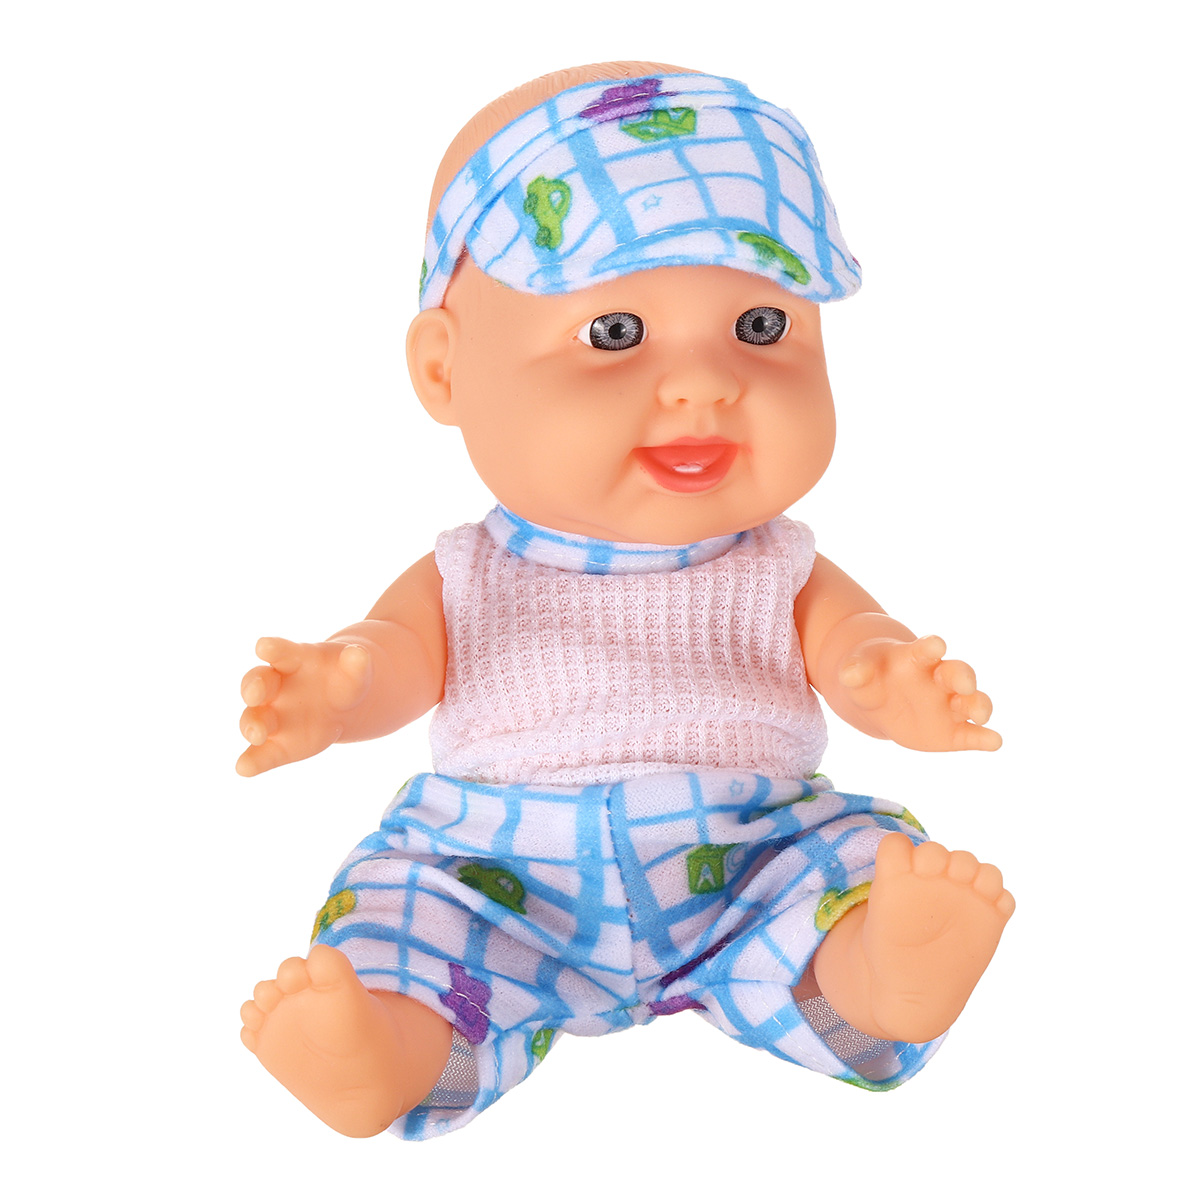 Simulation-Baby-3D-Creative-Cute-Doll-Play-House-Toy-Doll-Vinyl-Doll-Gift-1818656-21